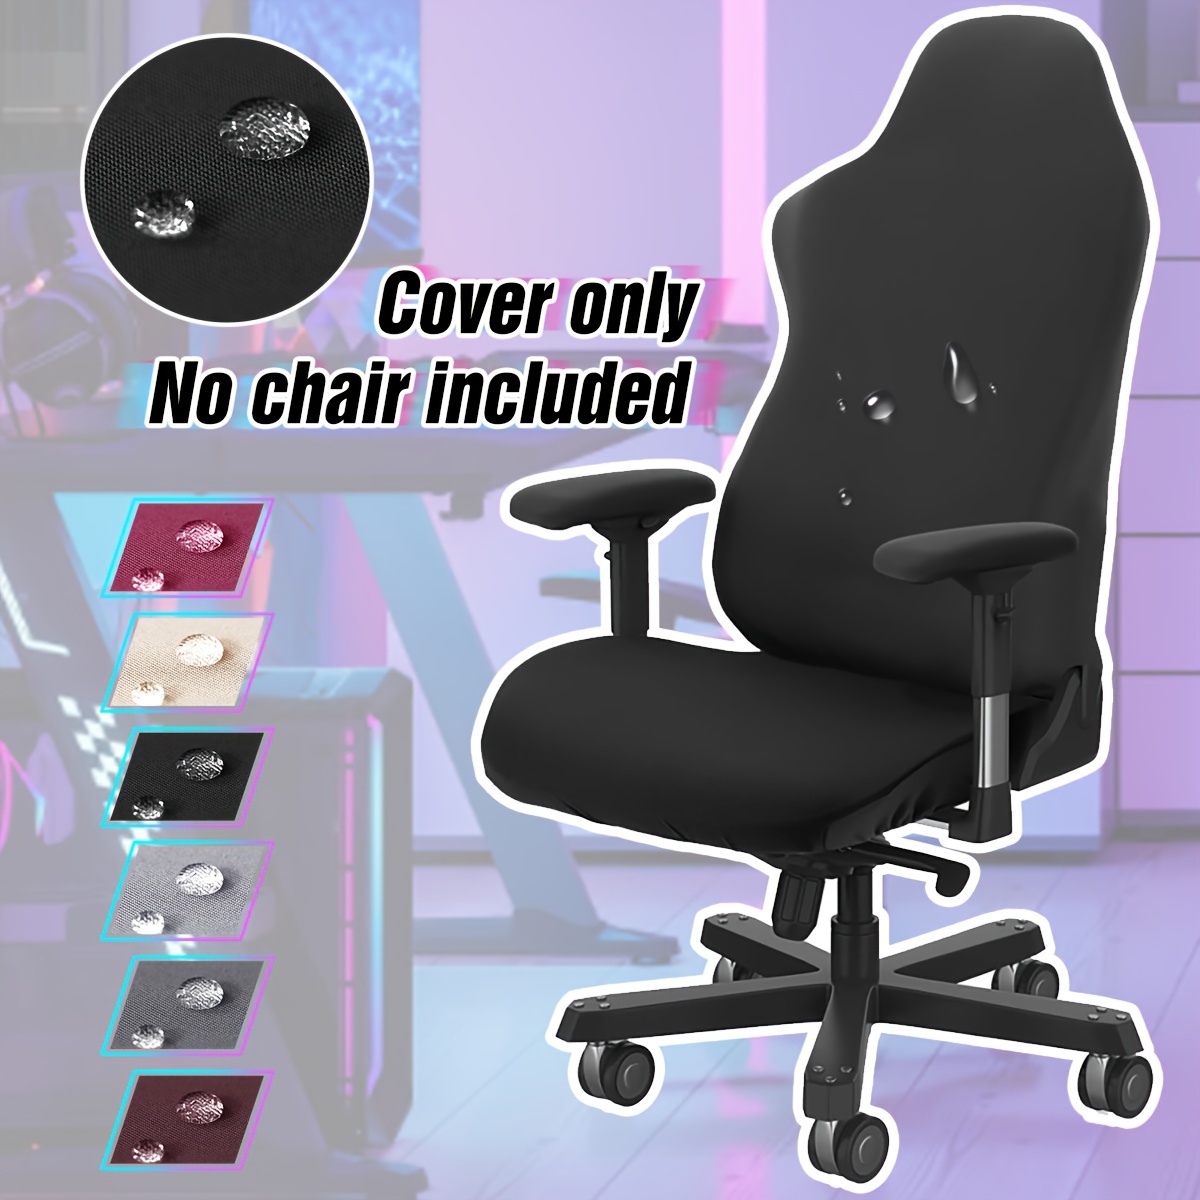 

4pcs Modern Stretch Office Gaming Chair Covers Set, Machine Washable Polyester Spandex Milk Fiber Fabric, Elastic Band Slipcover Grip, Waterproof Seat & Back Protector